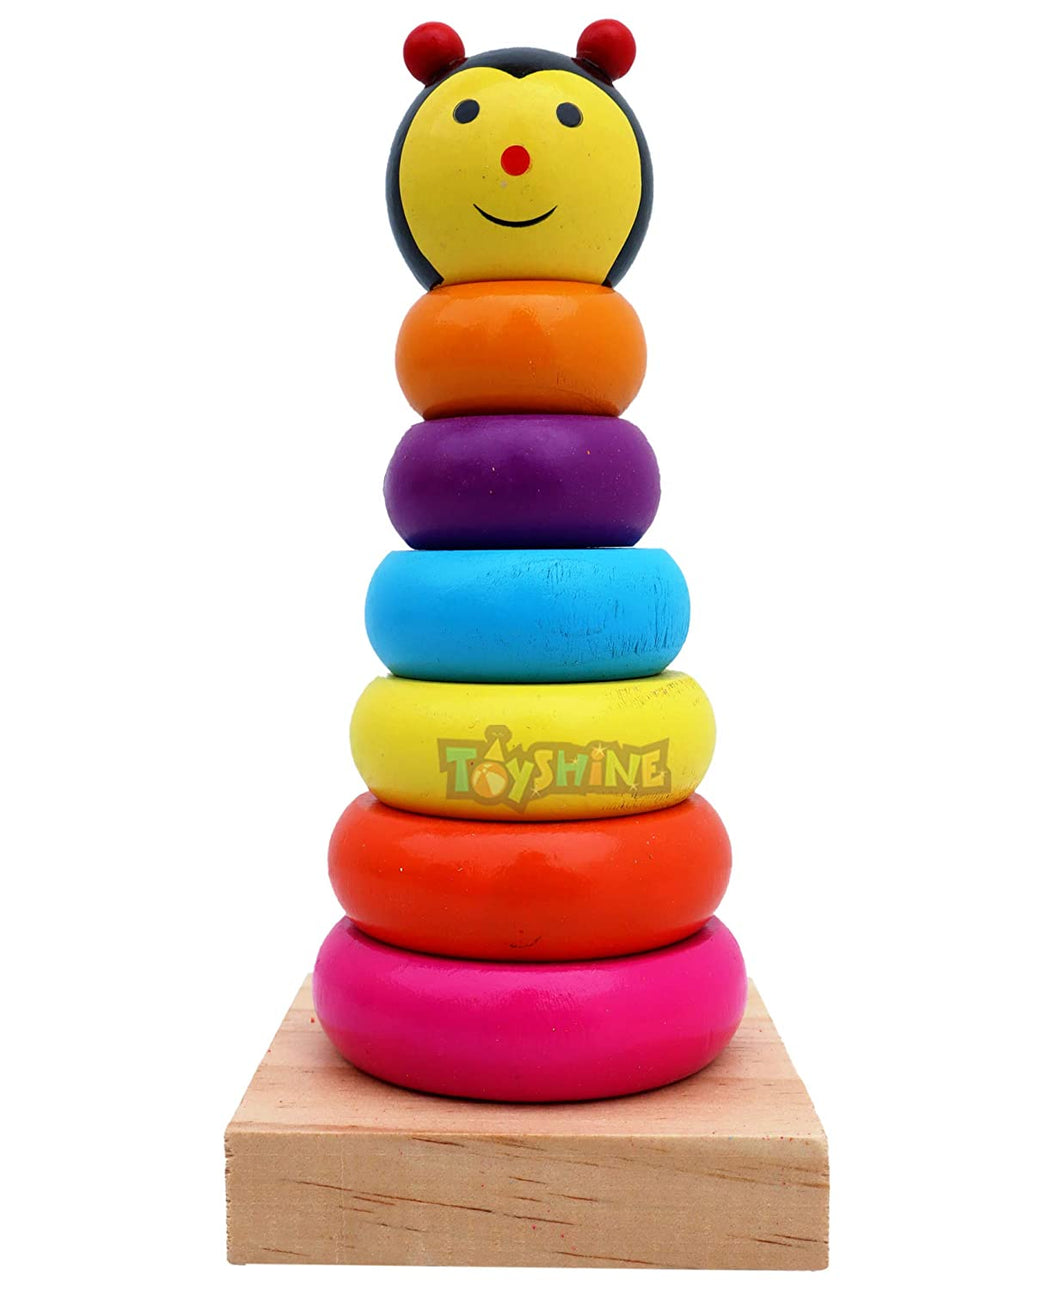 Toyshine Wooden Toy Stacker with Multiple Coloful Stacking Rings, Shapes Learning Educational Toy for 2 3 4 Year Kids, Teddy